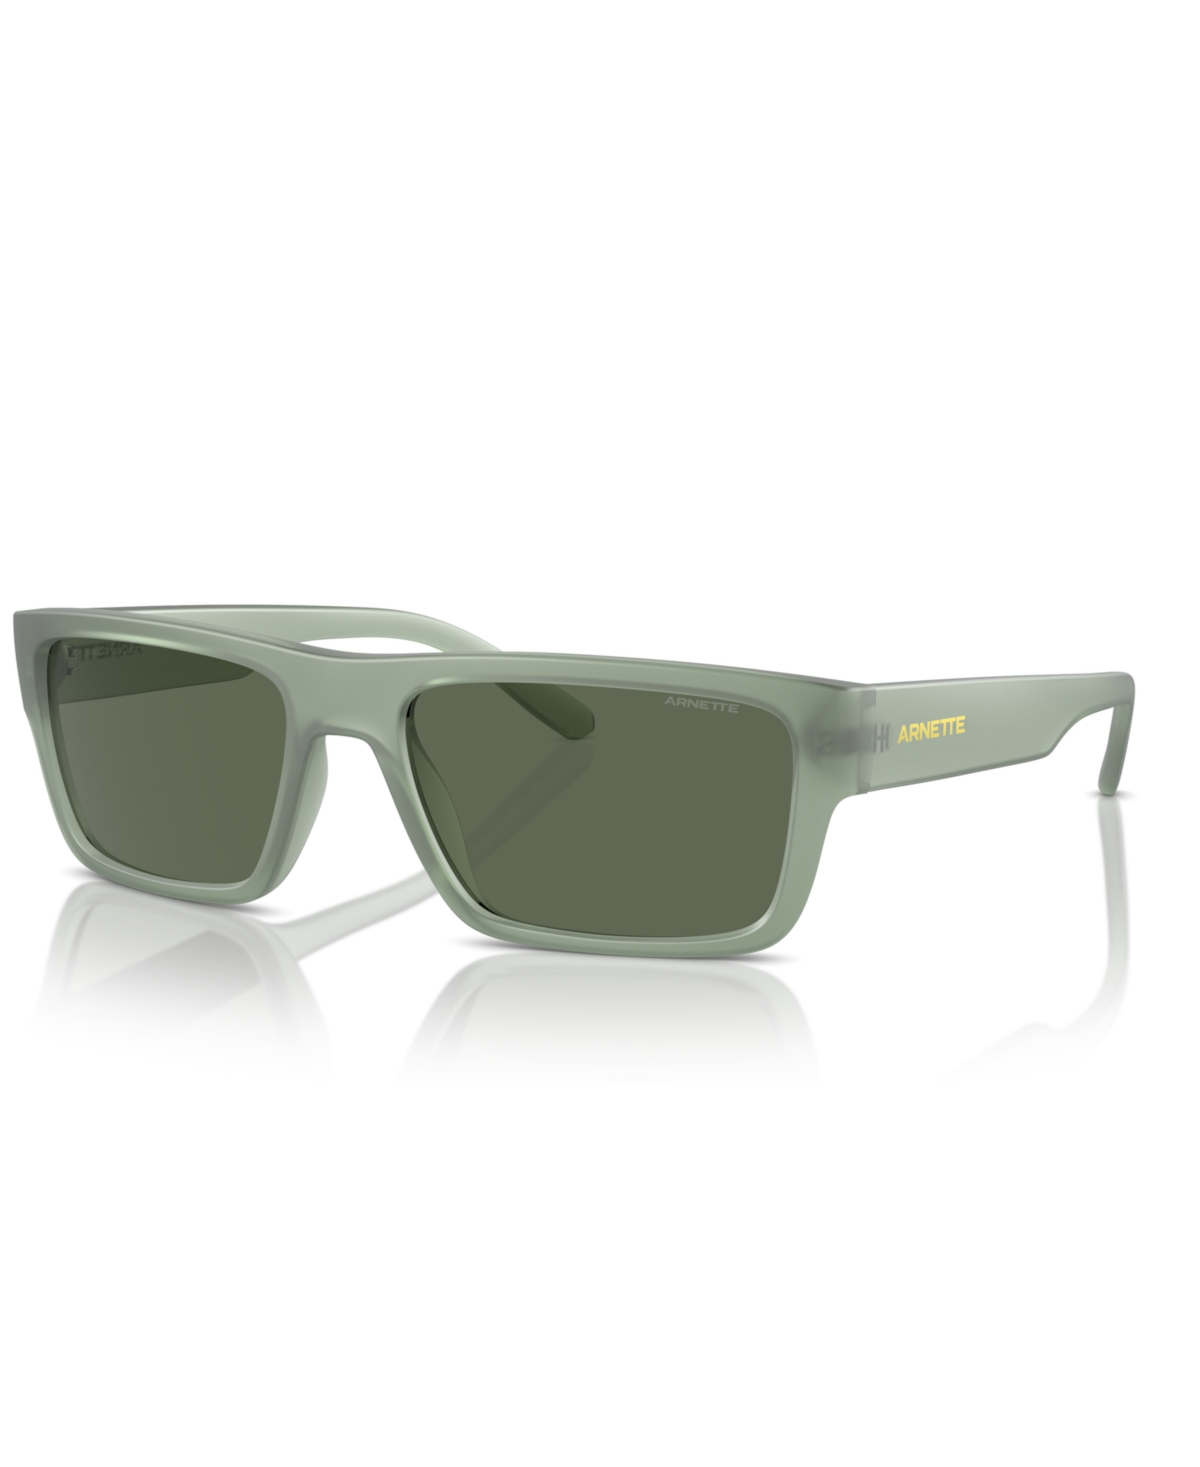 Men's Sunglasses, Phoxer An4338 - Frosted Sage